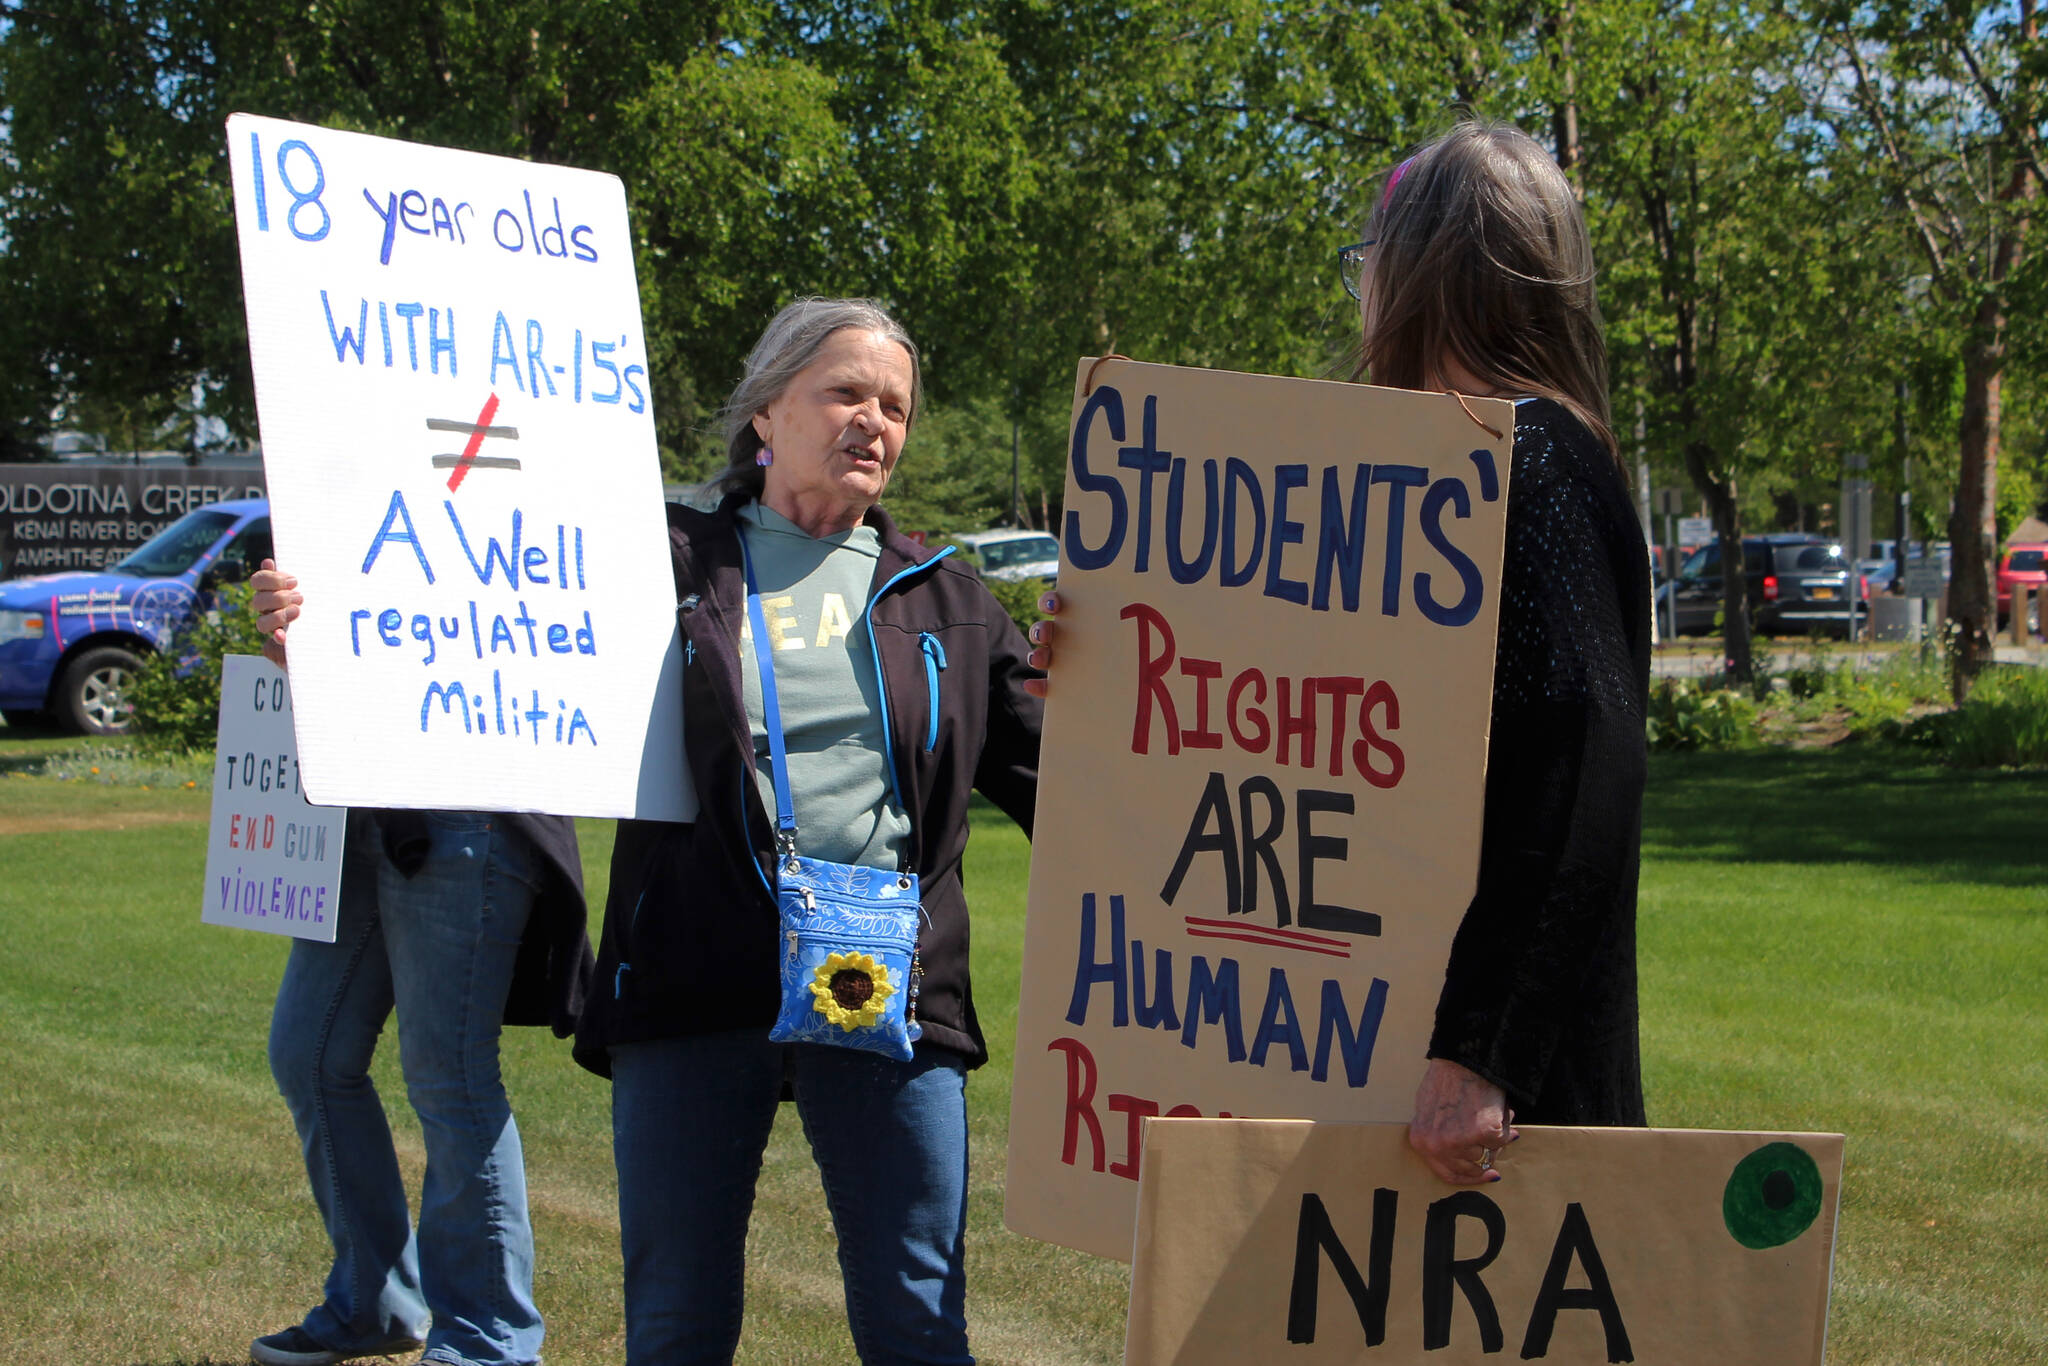 Fay Herold, left, and Michele Vasquez hold signs during a demonstration opposing gun violence on Saturday, June 11, 2022, in Soldotna, Alaska. The local protest was part of a nationwide call to action issued by the nonprofit organization March for Our Lives, which was formed after a 2018 school shooting in Parkland, Florida, and aims to end gun violence. (Ashlyn O’Hara/Peninsula Clarion)